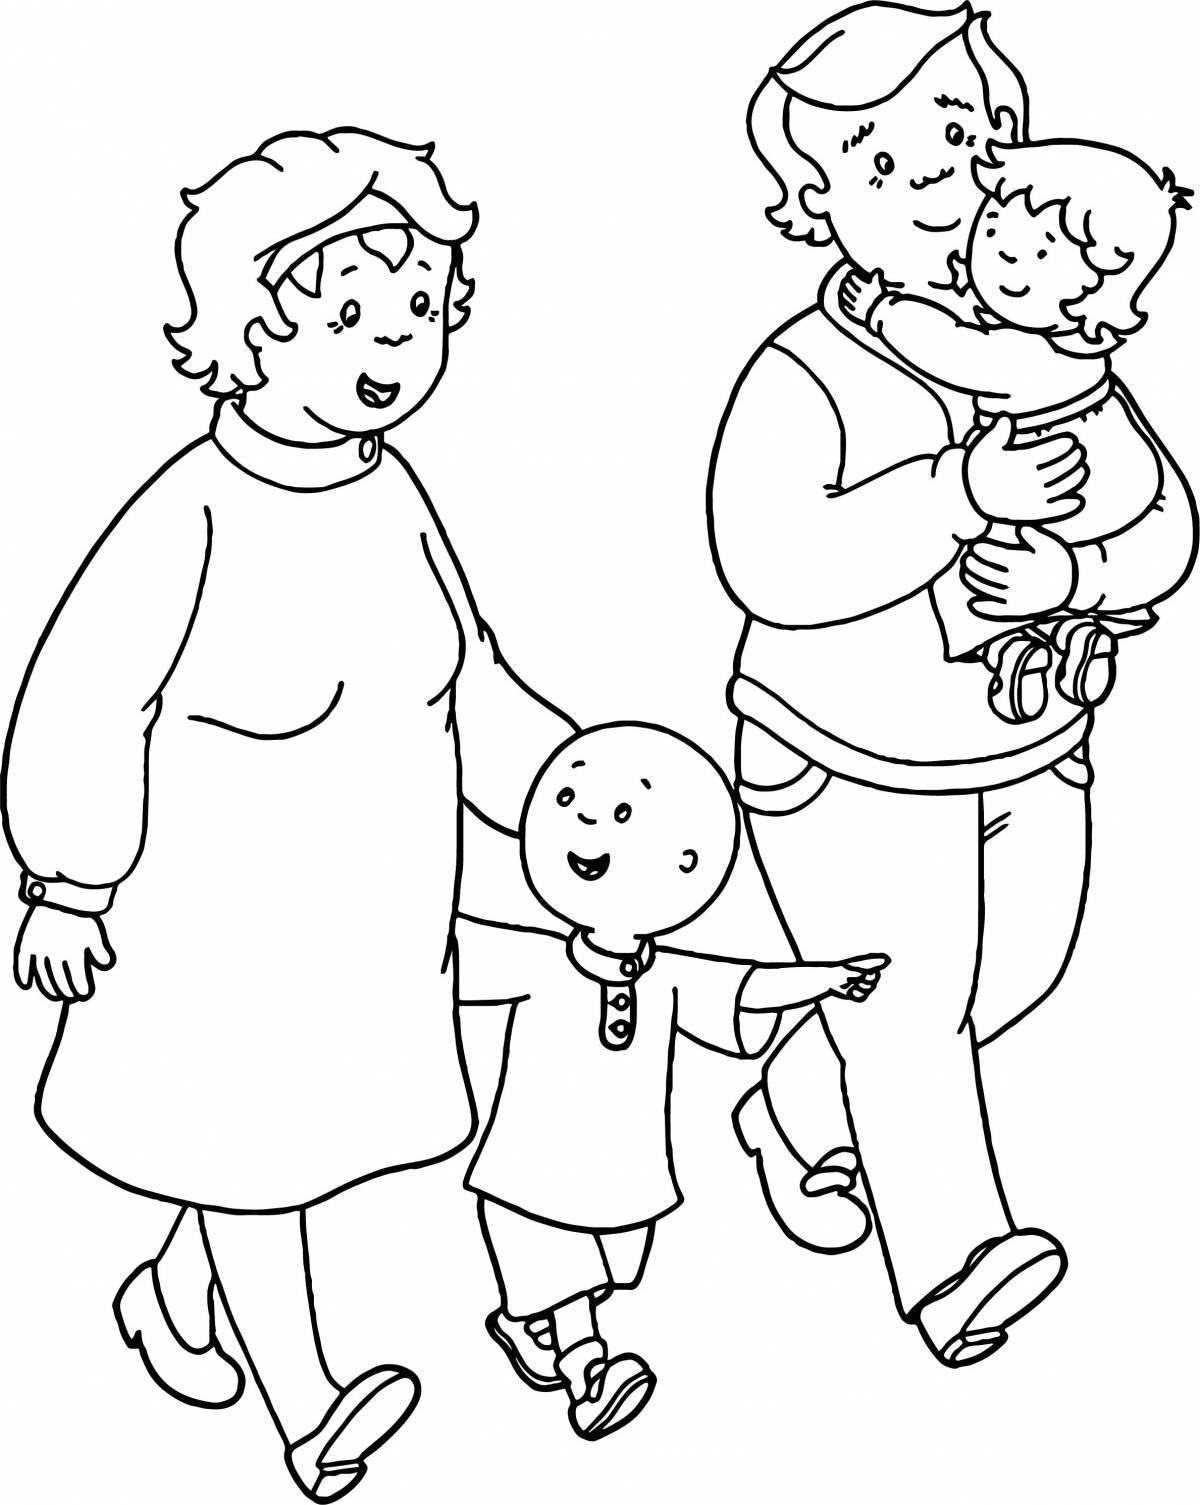 Blissful family coloring book